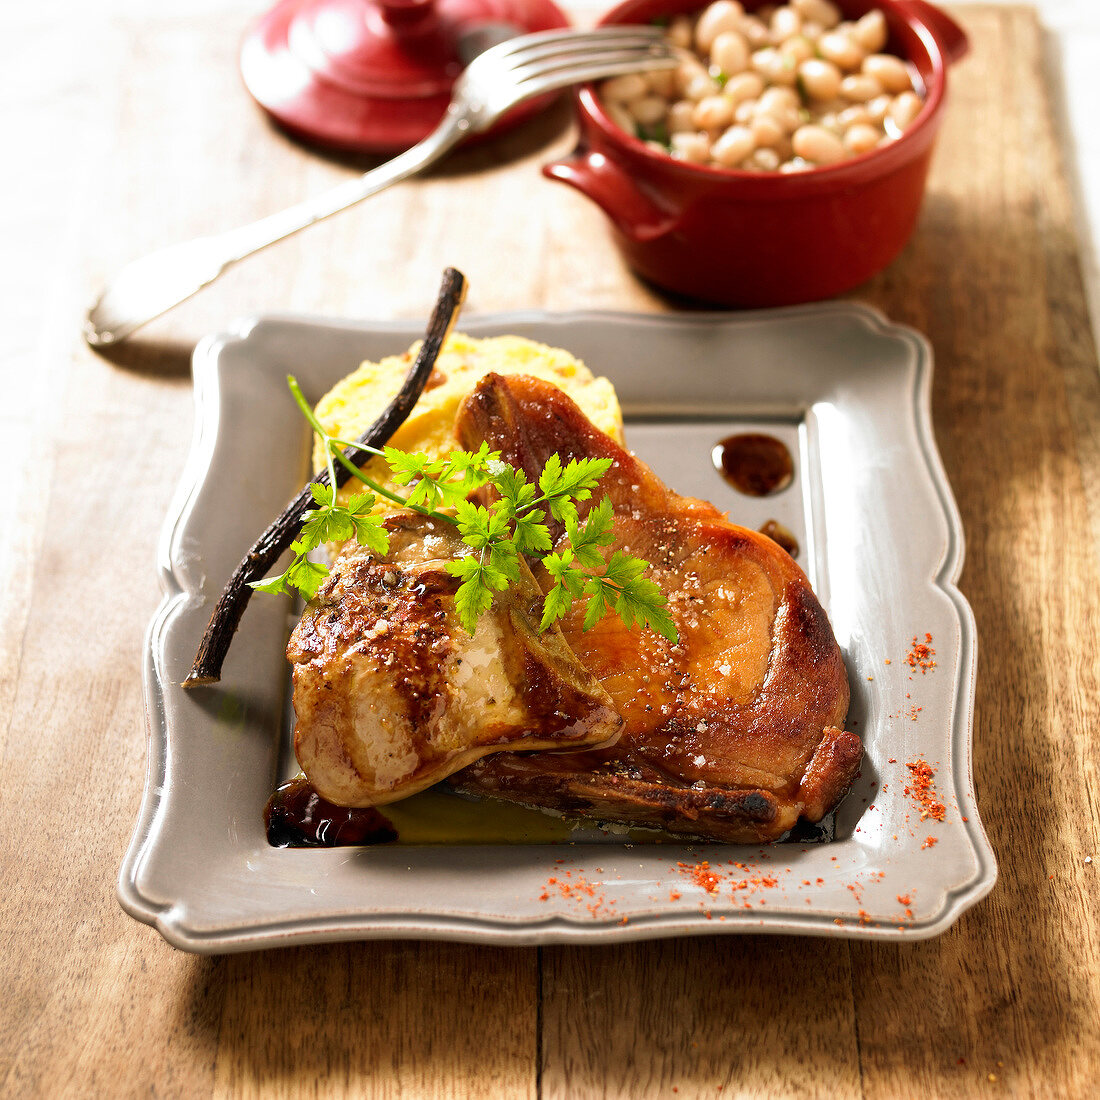 Rossini pork chops with licorice sauce,mashed potatoes and white haricot bean casseole